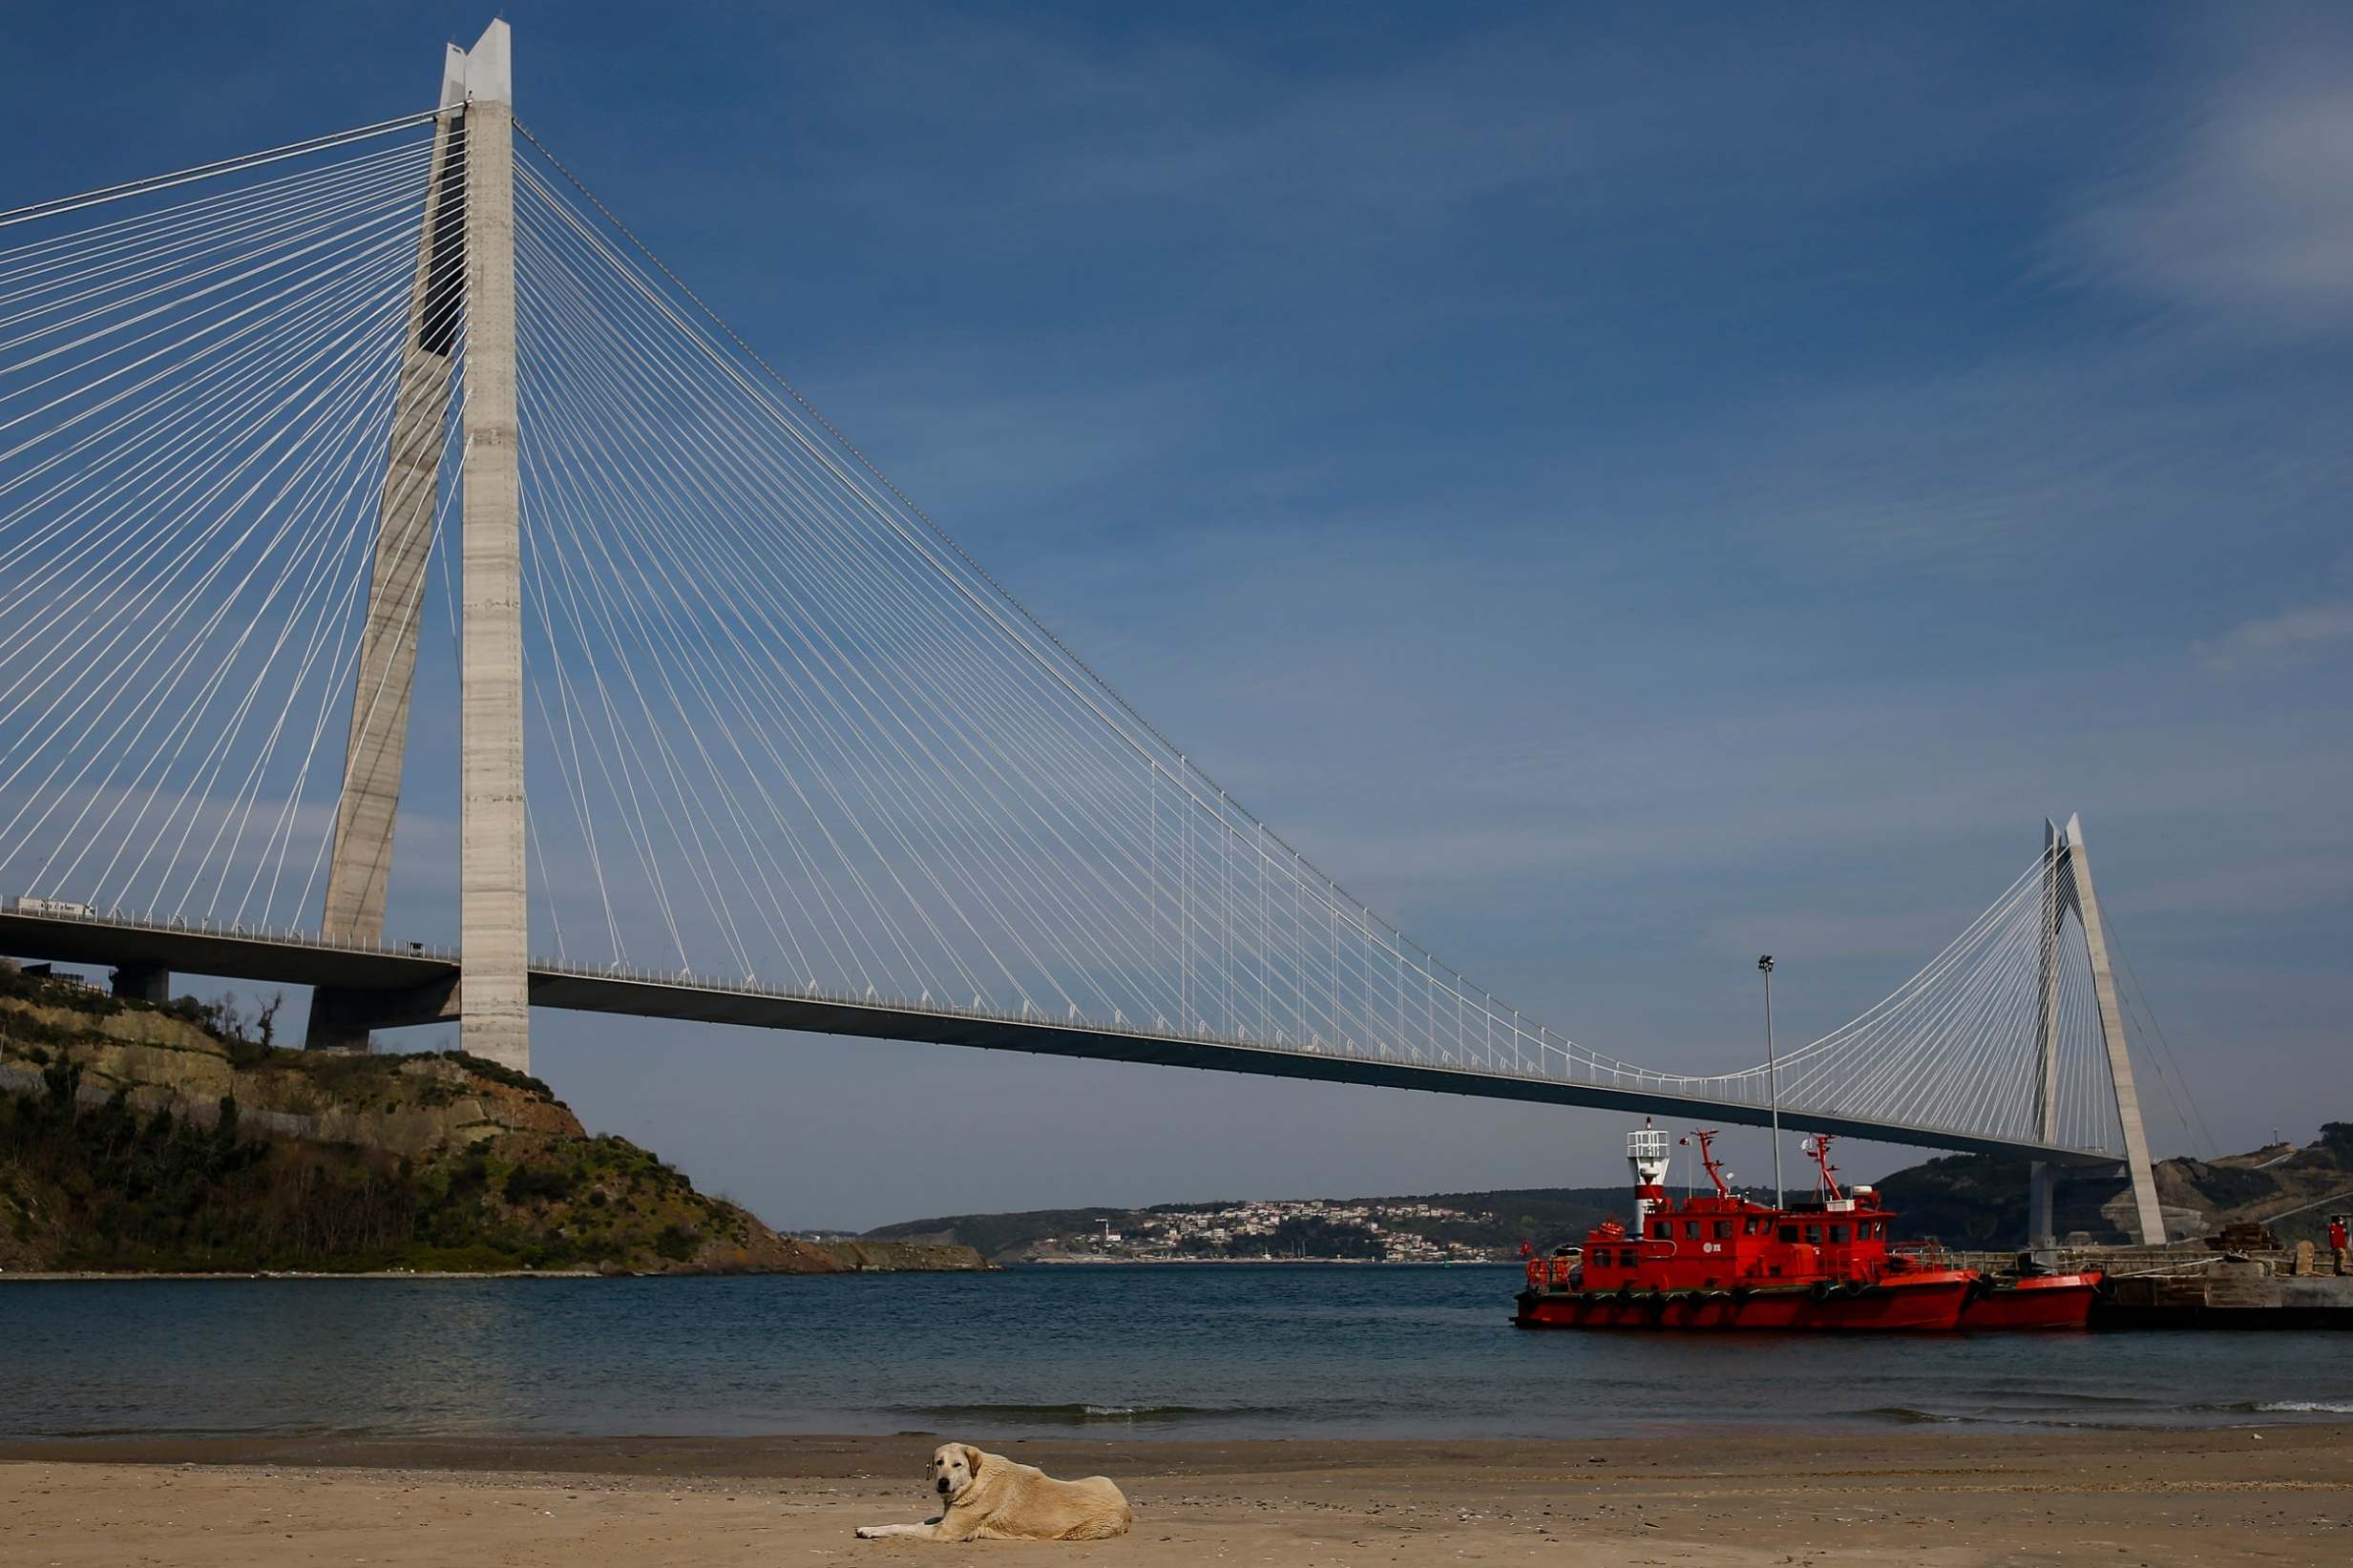 The Yavuz Sultan Selim Bridge over the Bosphorus Strait yesterday - even the stray animals appear to be waiting for the humans to return